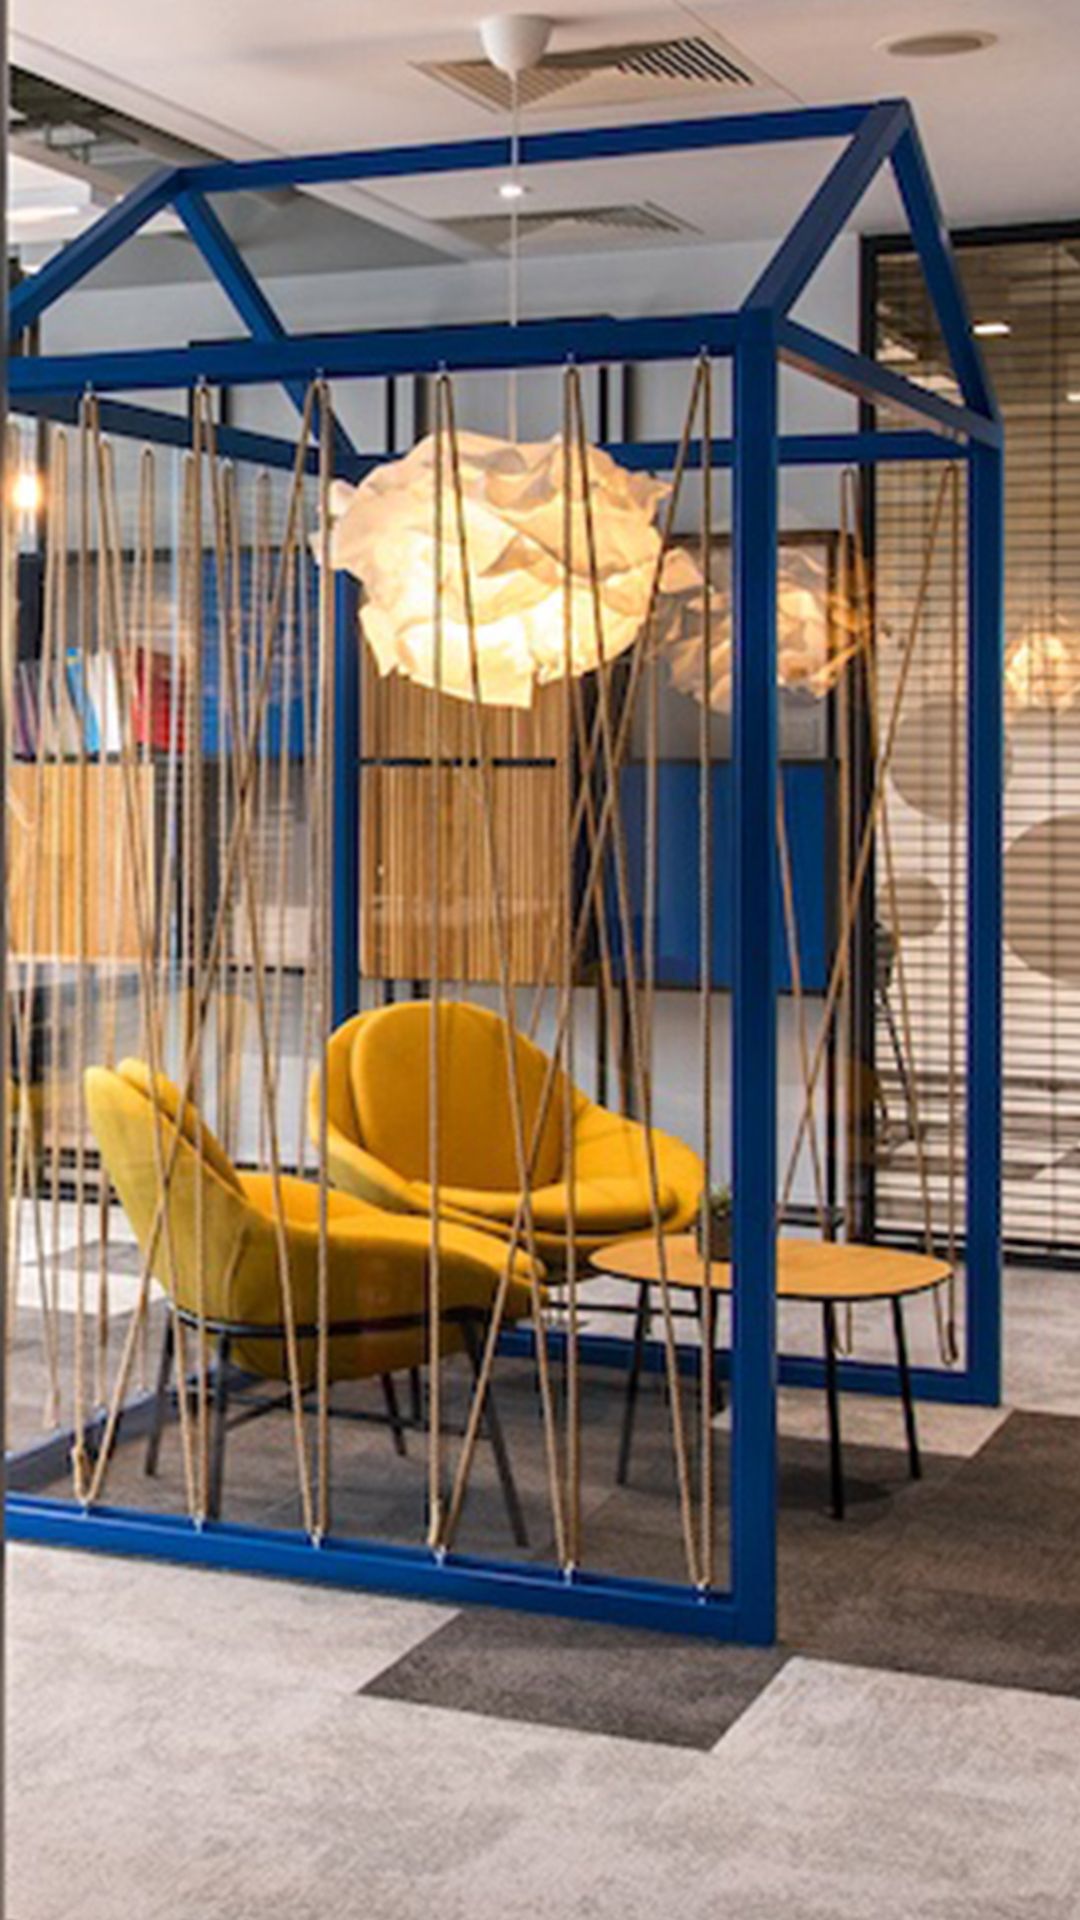 Kreativa - interior design for Hasbro's office in Warsaw, phone booth, meeting point in open space